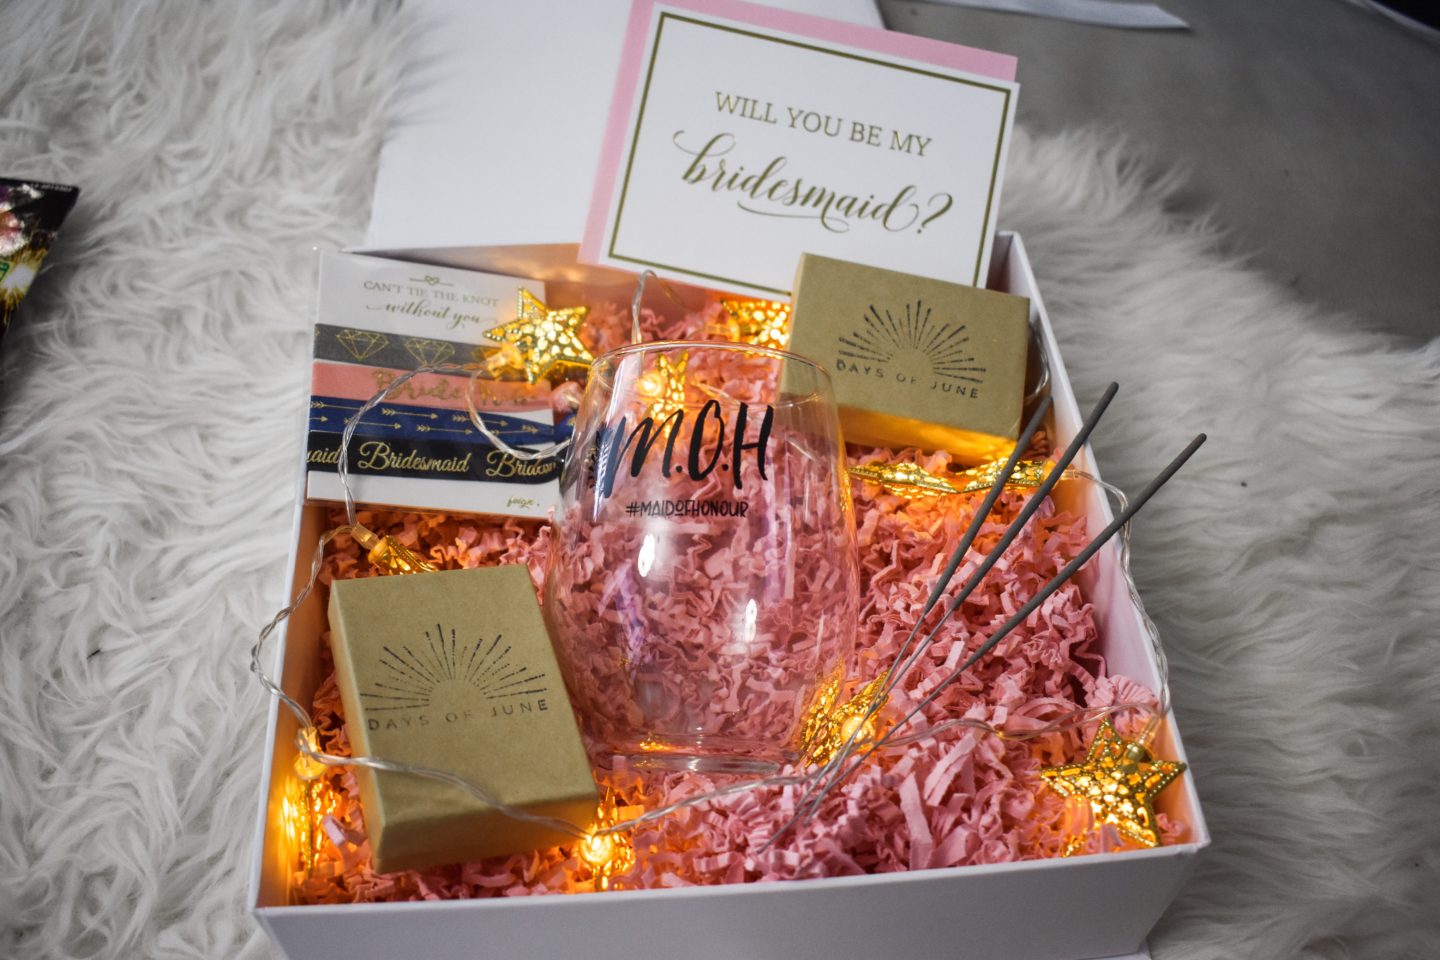 4 Things to Include to Make the Perfect Bridesmaid Proposal Boxes